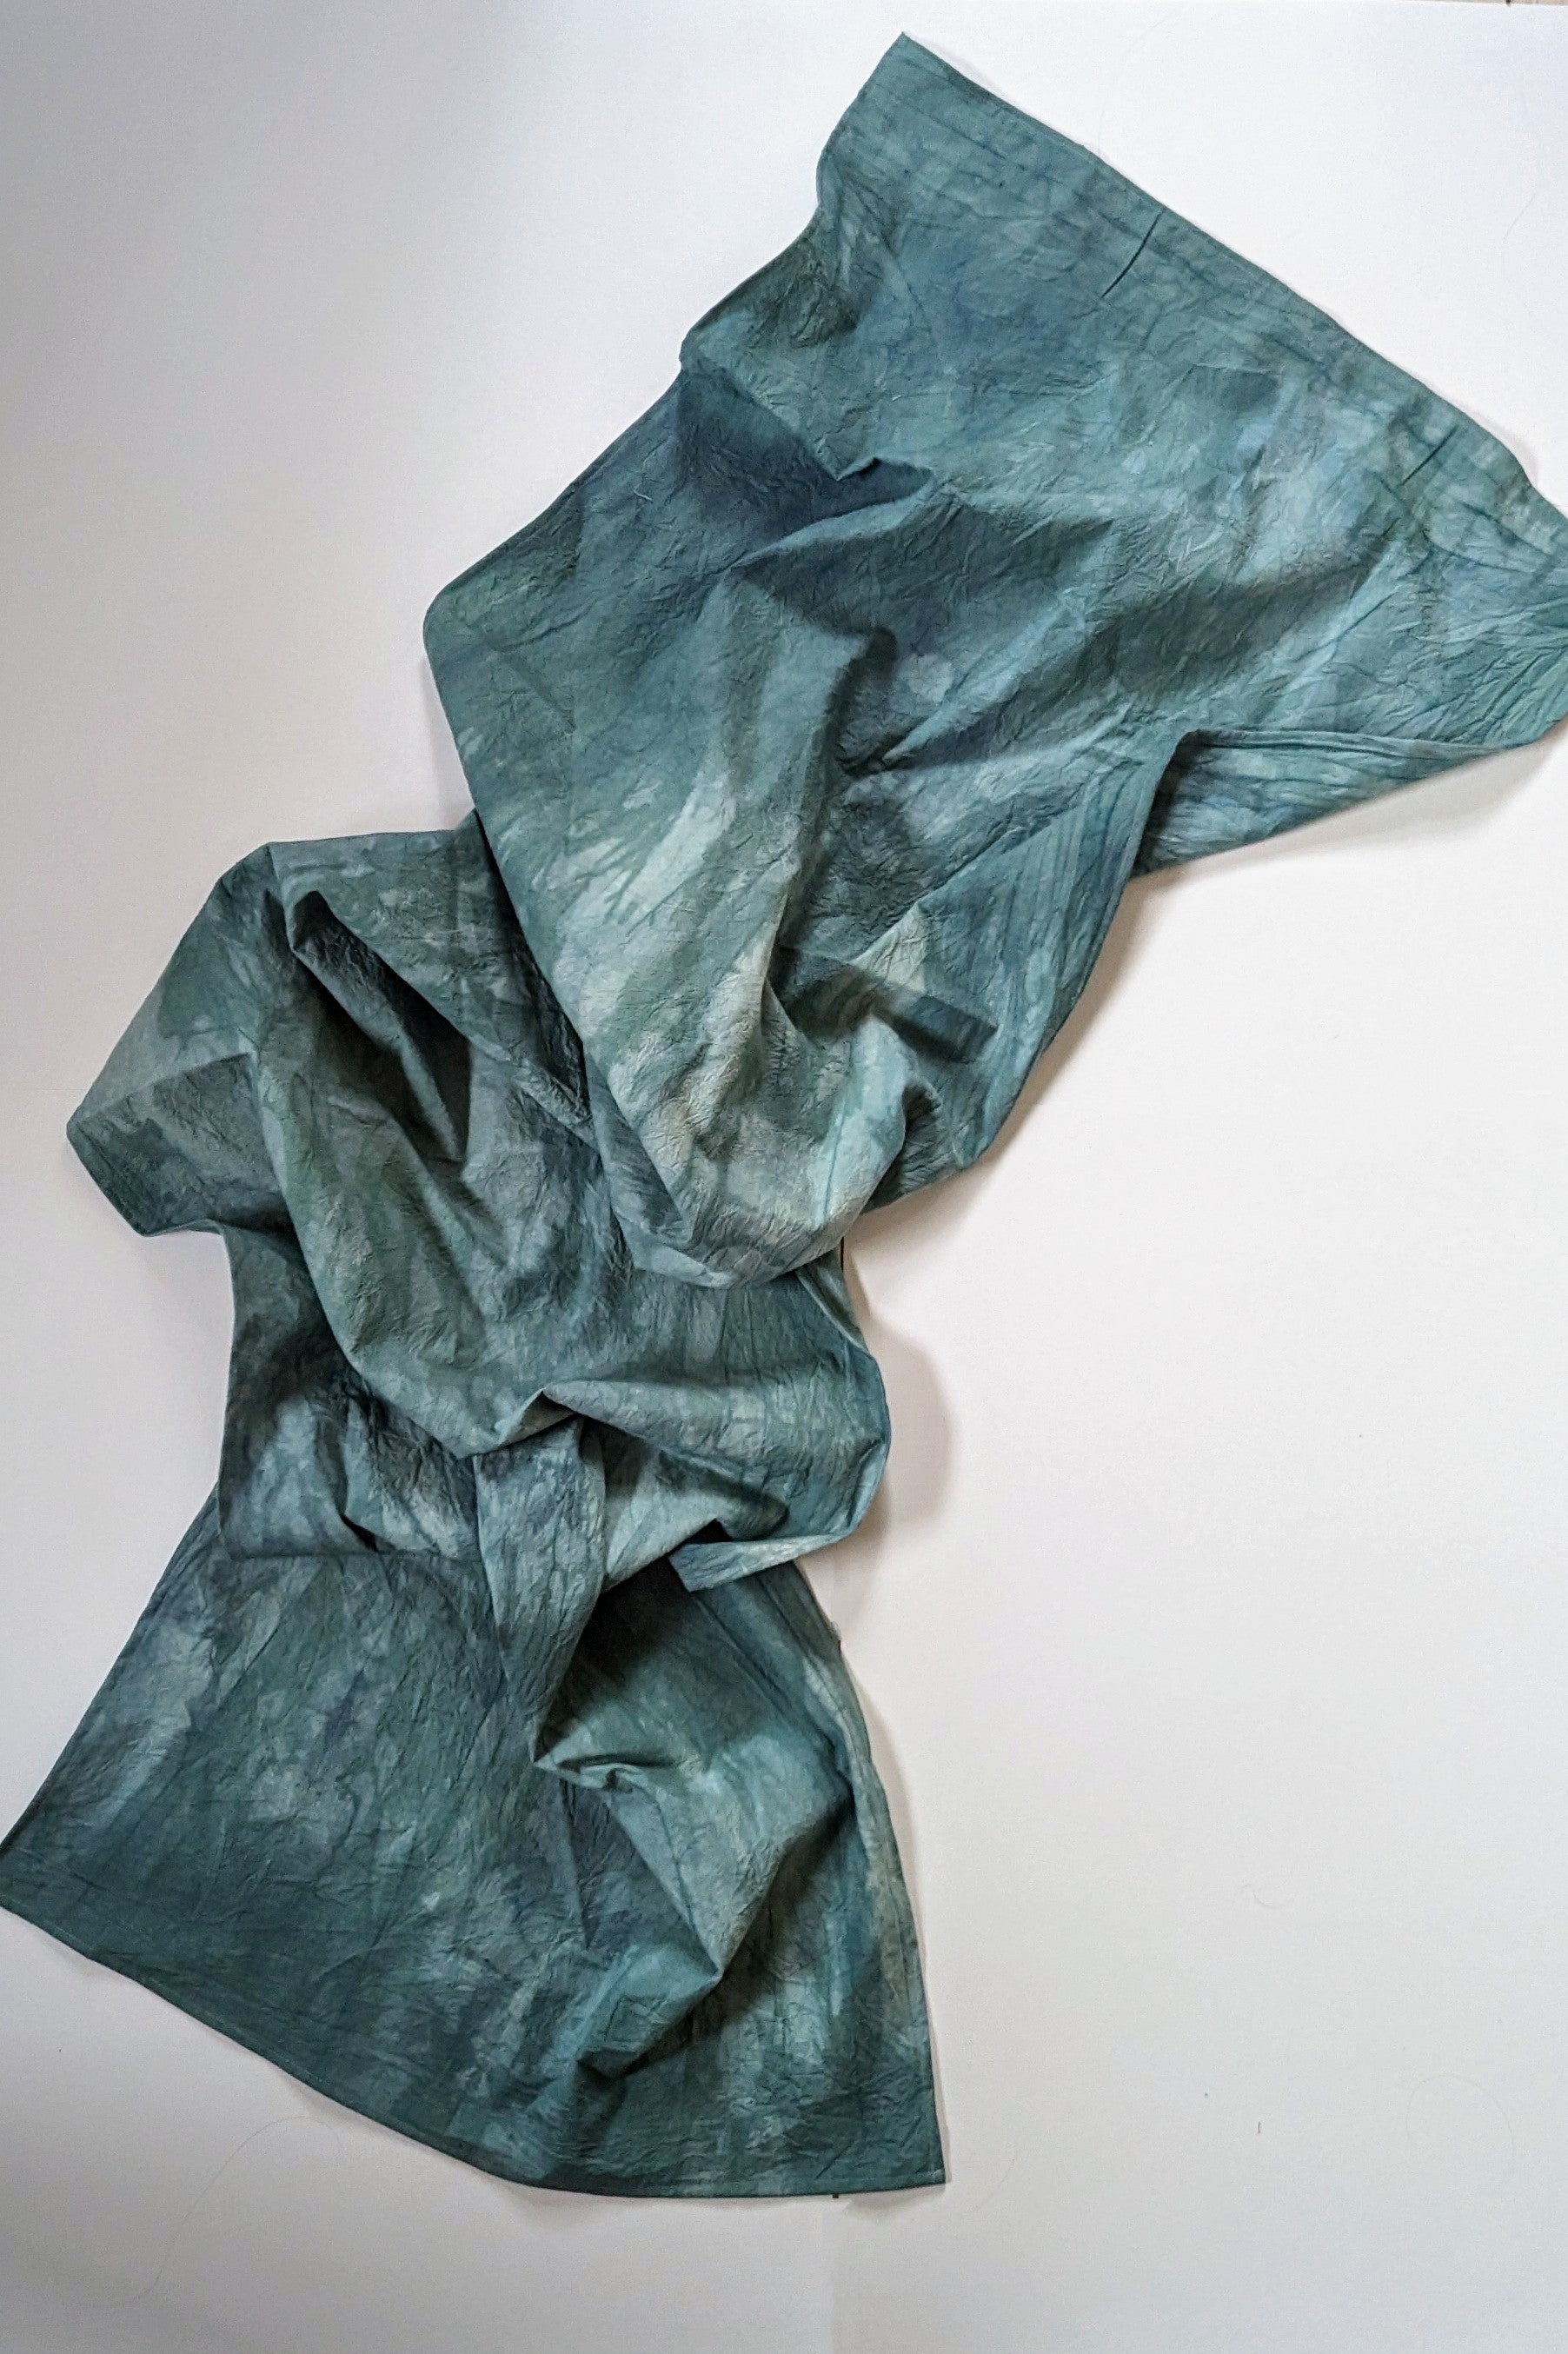 Hand Dyed Jumbo Cotton Shawl Wrap by Connally Goods